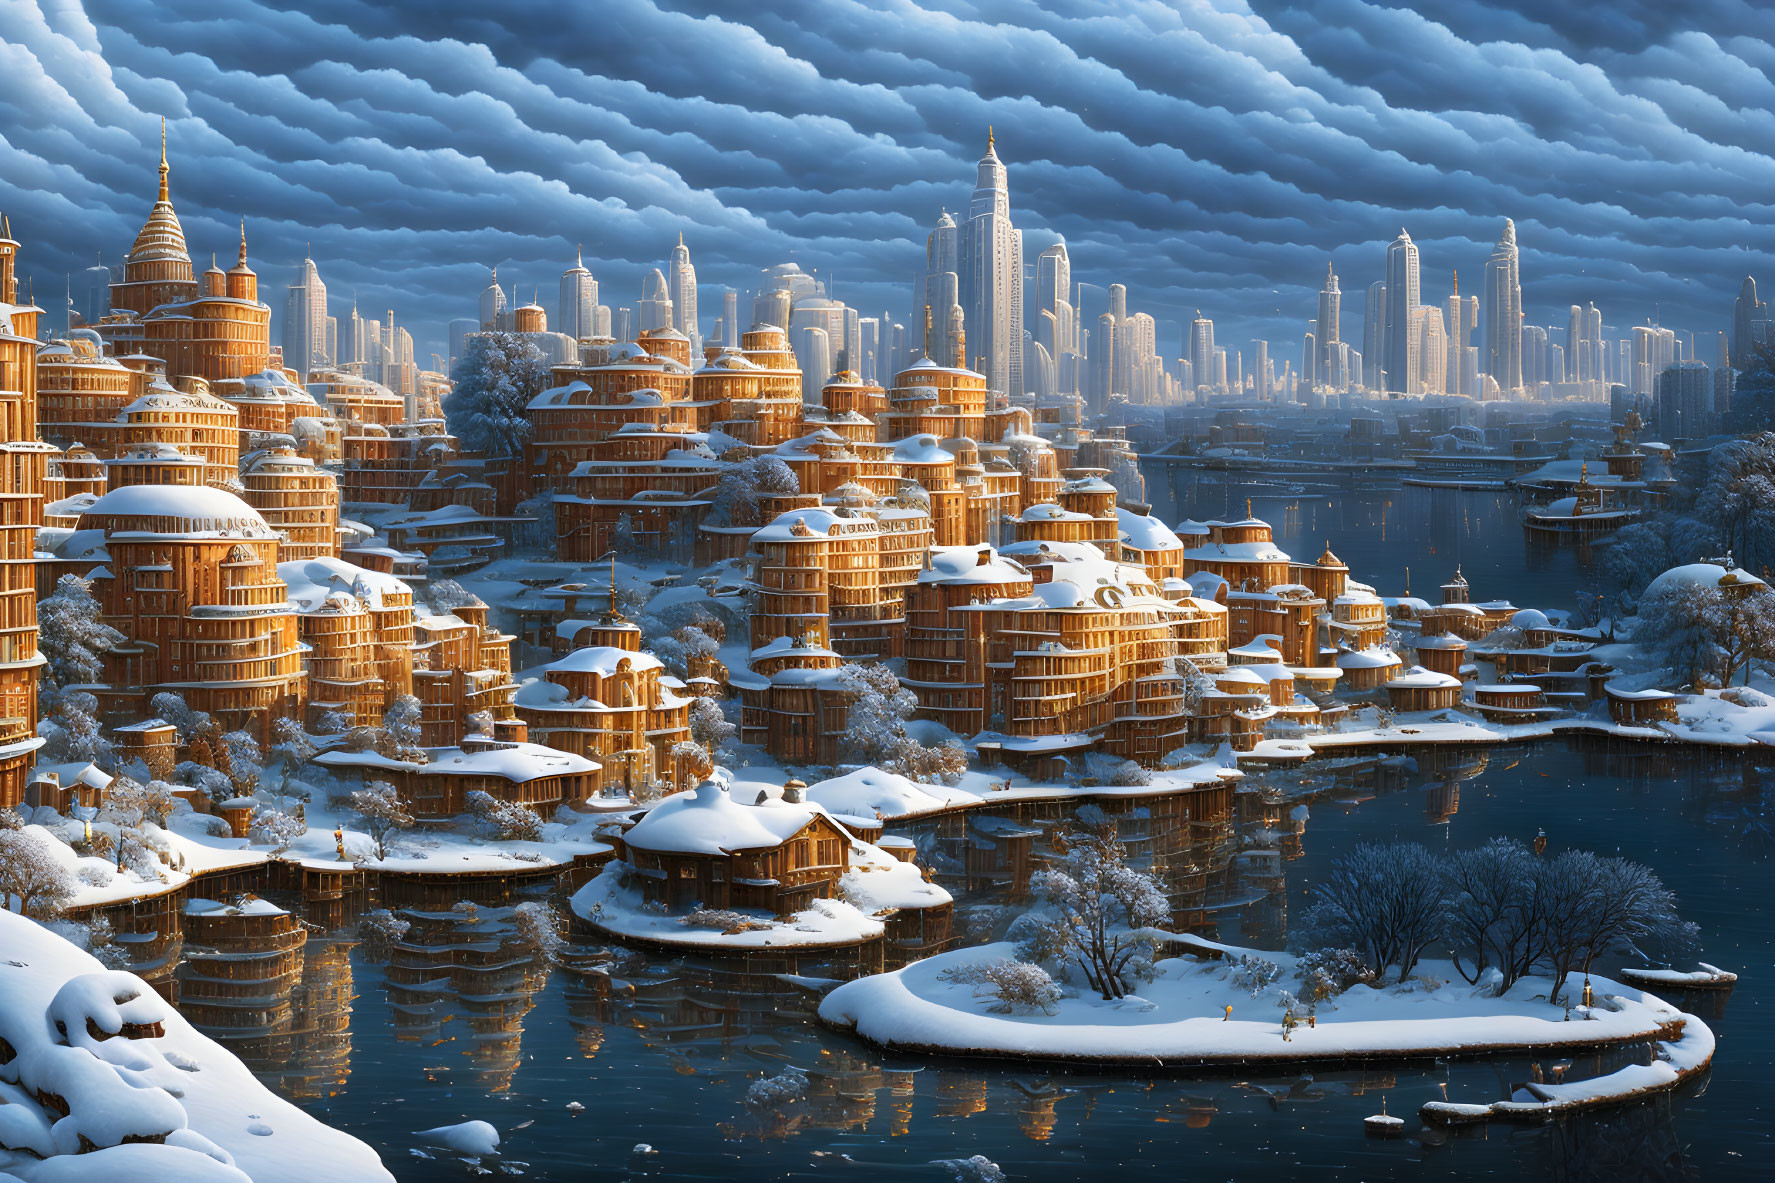 Snowy futuristic cityscape with traditional wooden buildings on riverfront at dusk or dawn